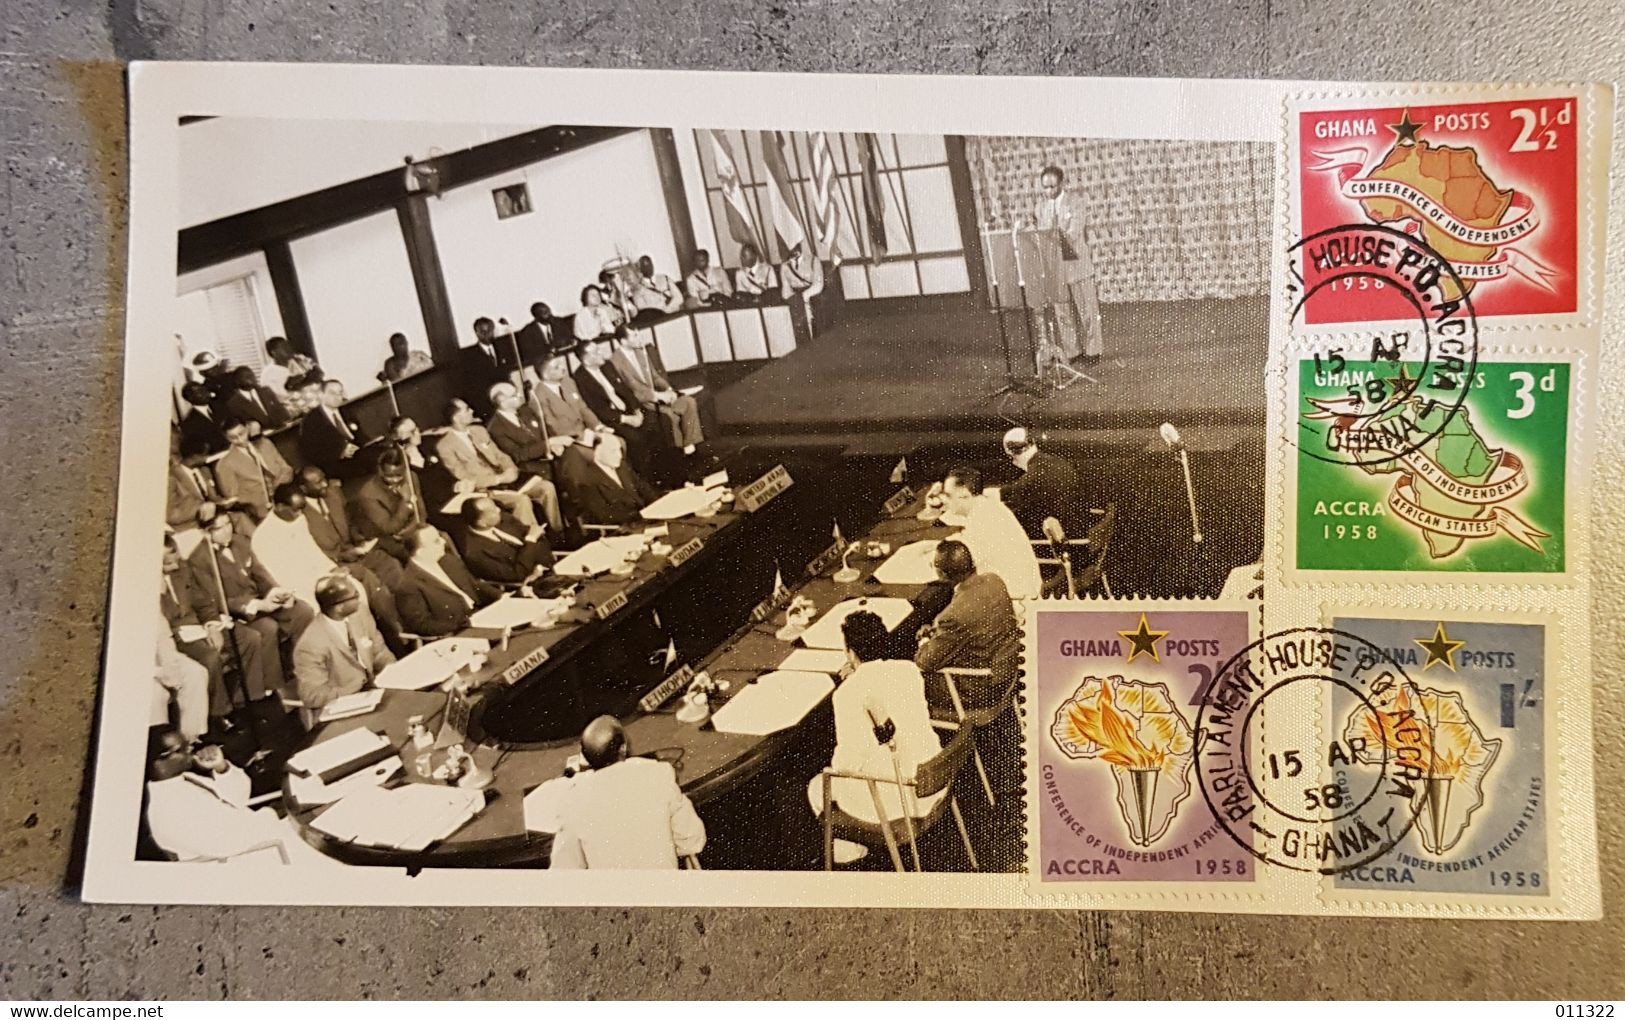 GHANA POSTCARD 1958 CONFERENCE OF INDEPENDENT AFRICAN STATES ACCRA - Ghana - Gold Coast